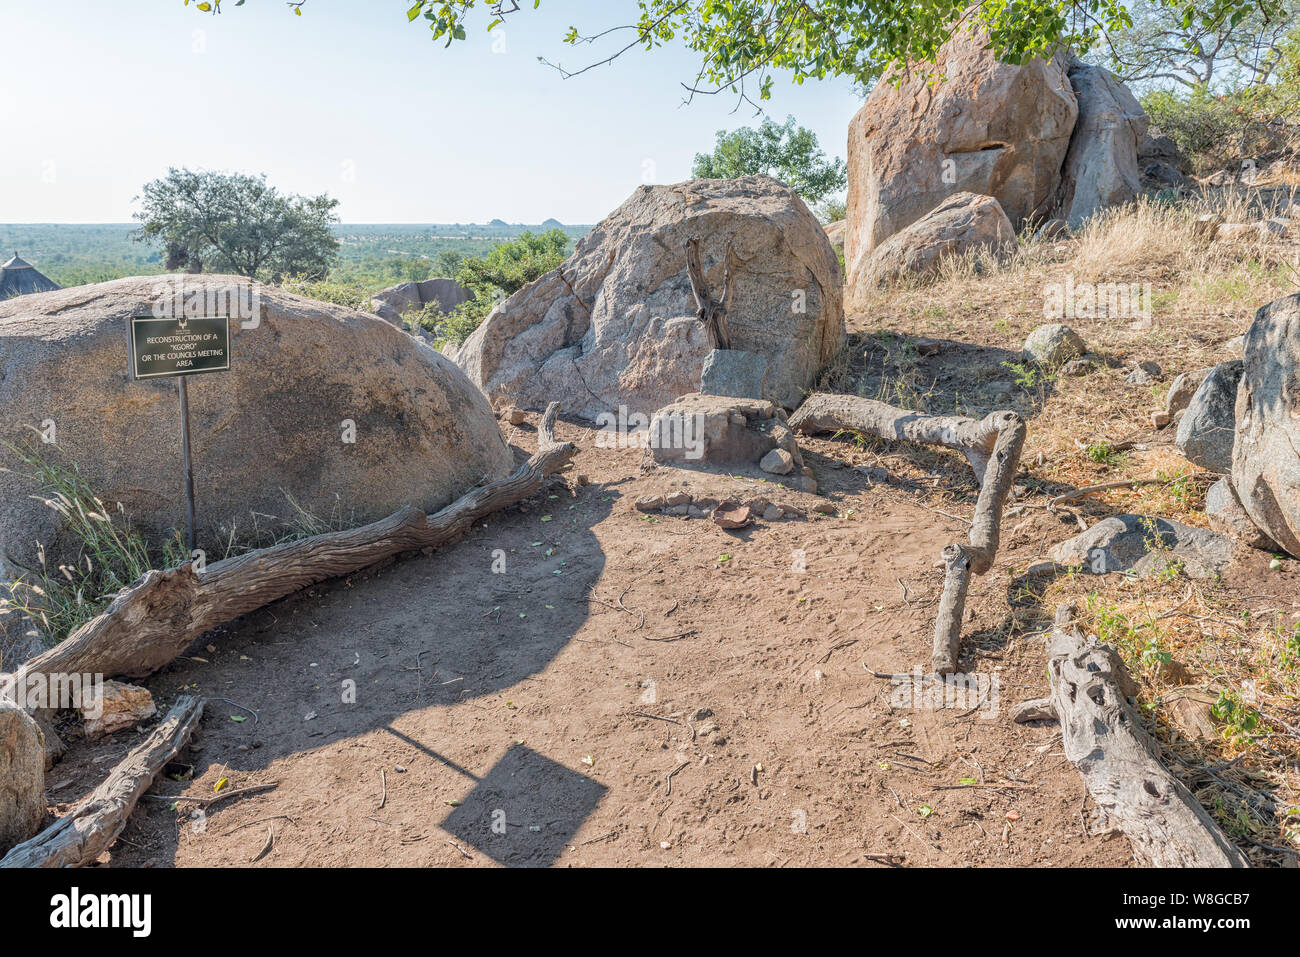 KRUGER NATIONAL PARK, SOUTH AFRICA - MAY 9, 2019: Reconstructed council meeting area at the Masorini Heritage Site near Phalaborwa Stock Photo